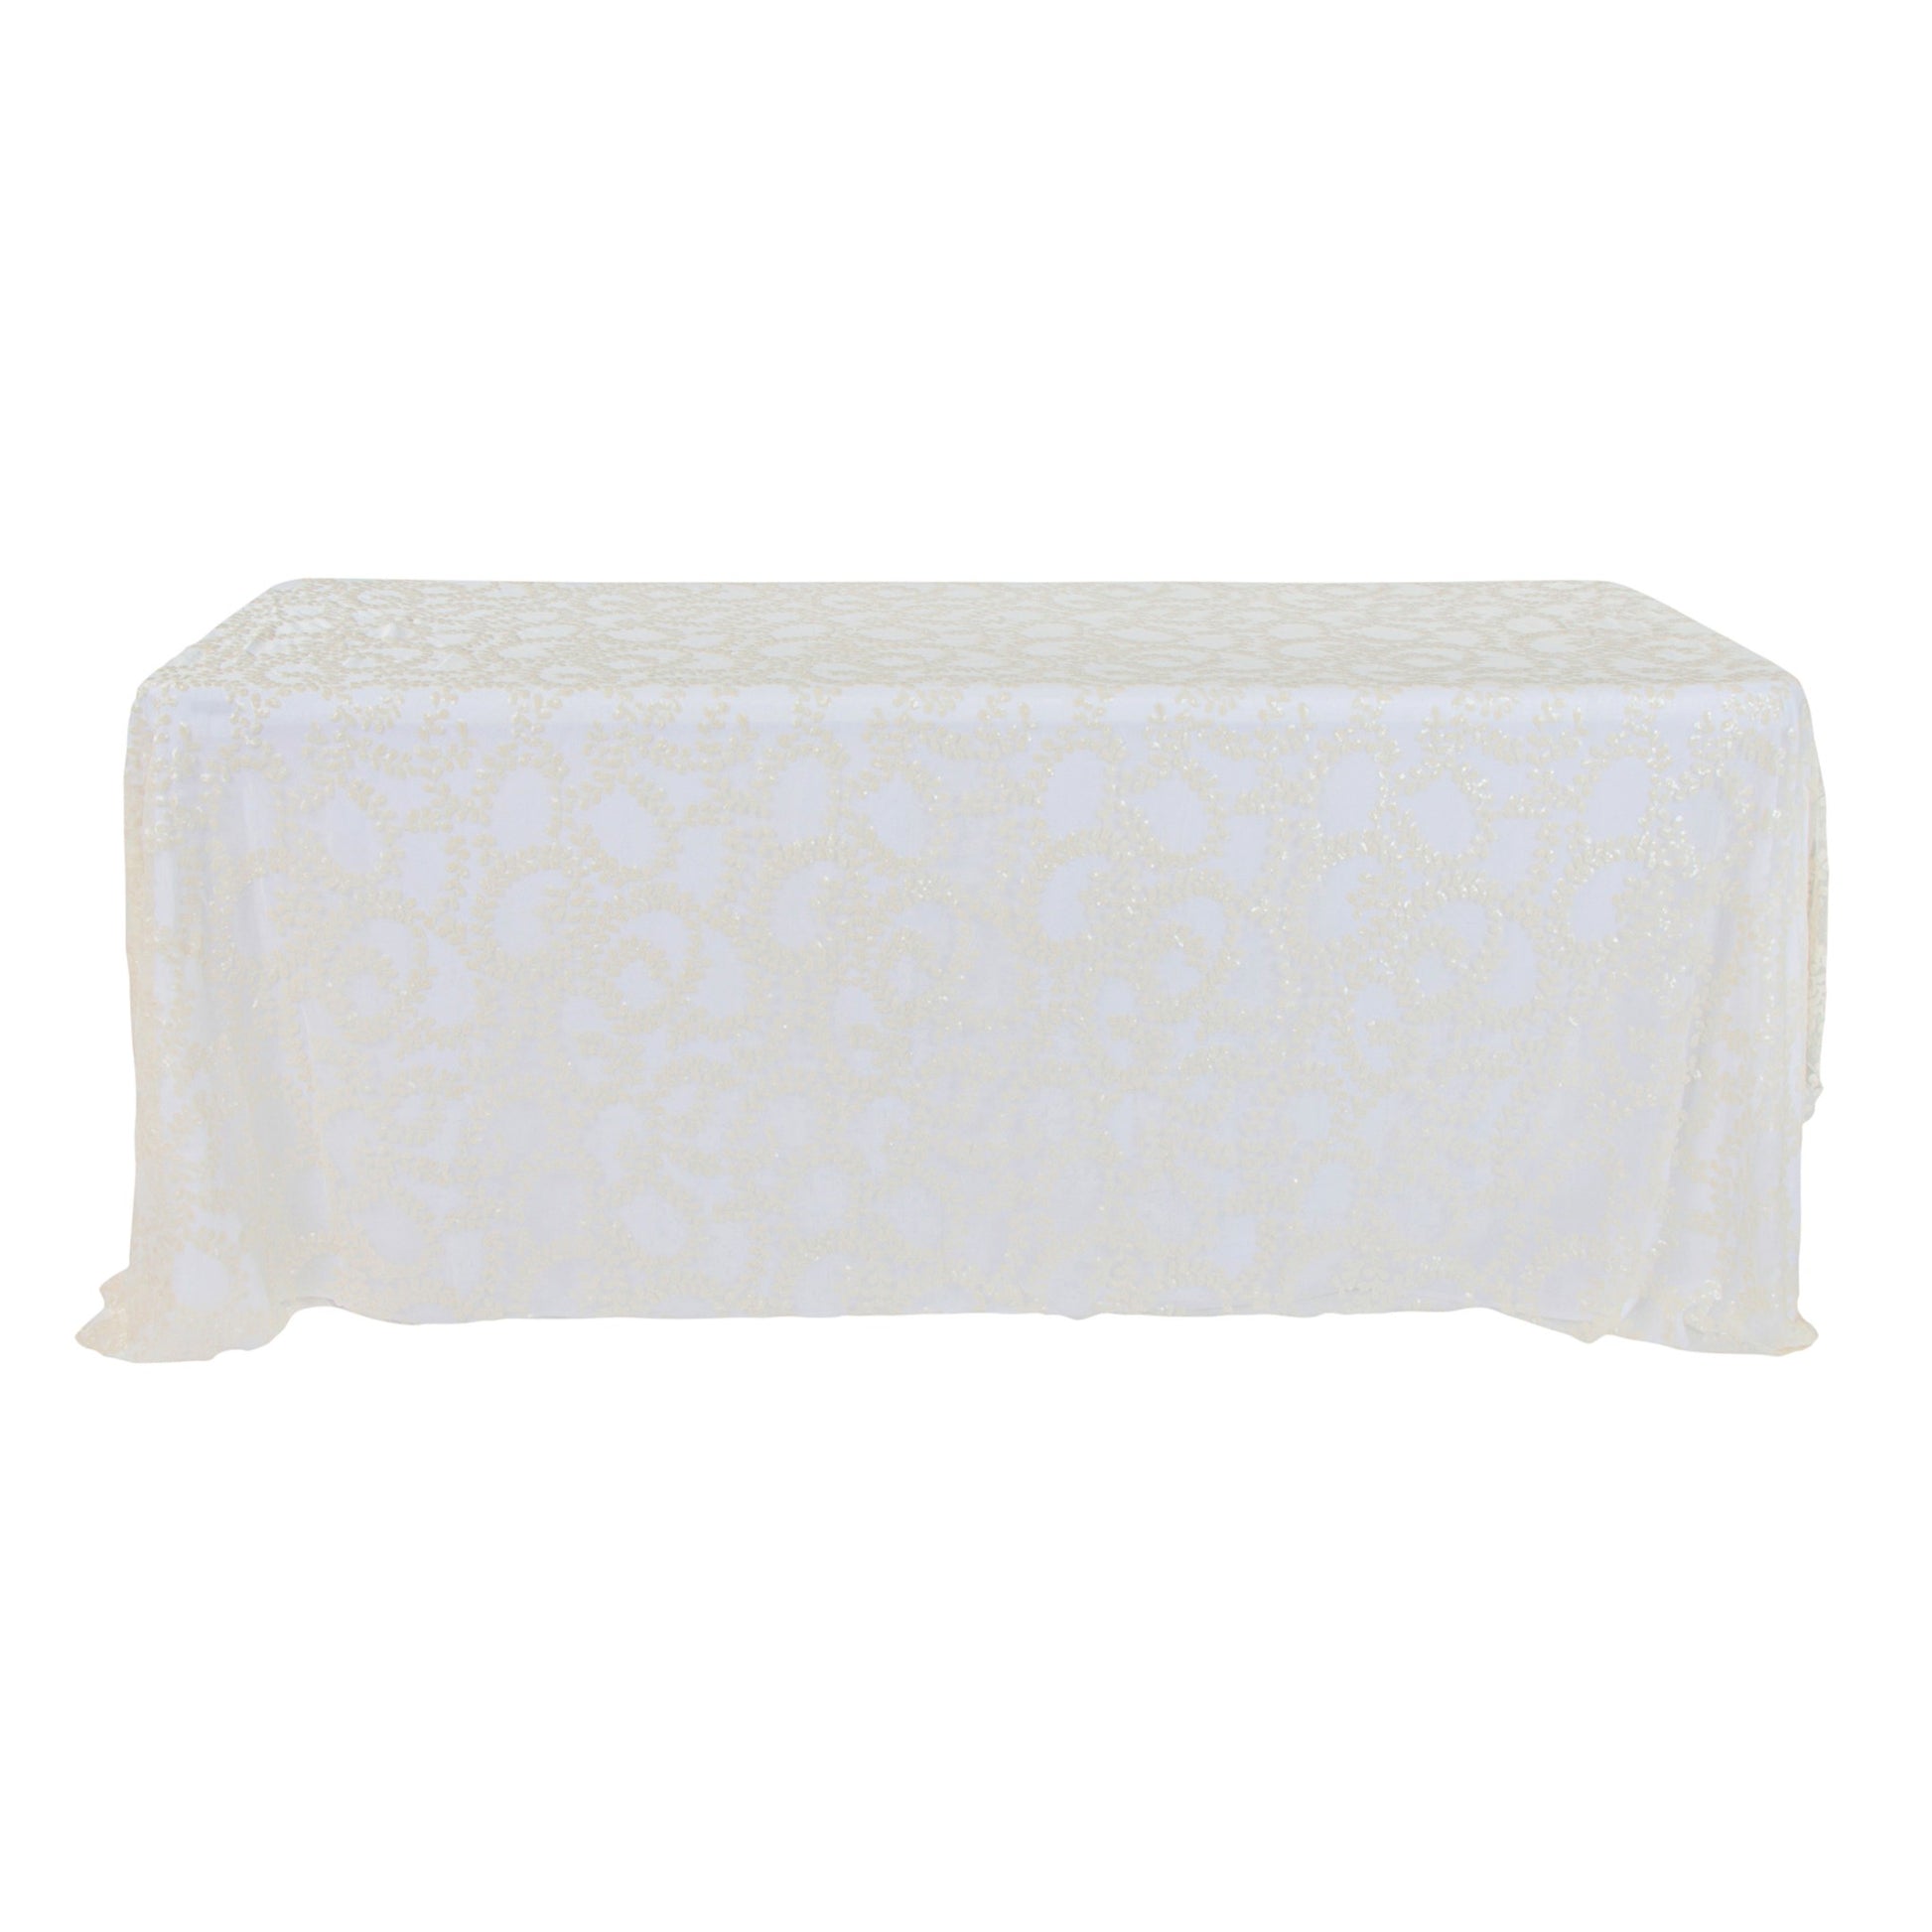 Sequin Vine Tablecloth Overlay 90"x156" Rectangle - Light Ivory/Off White